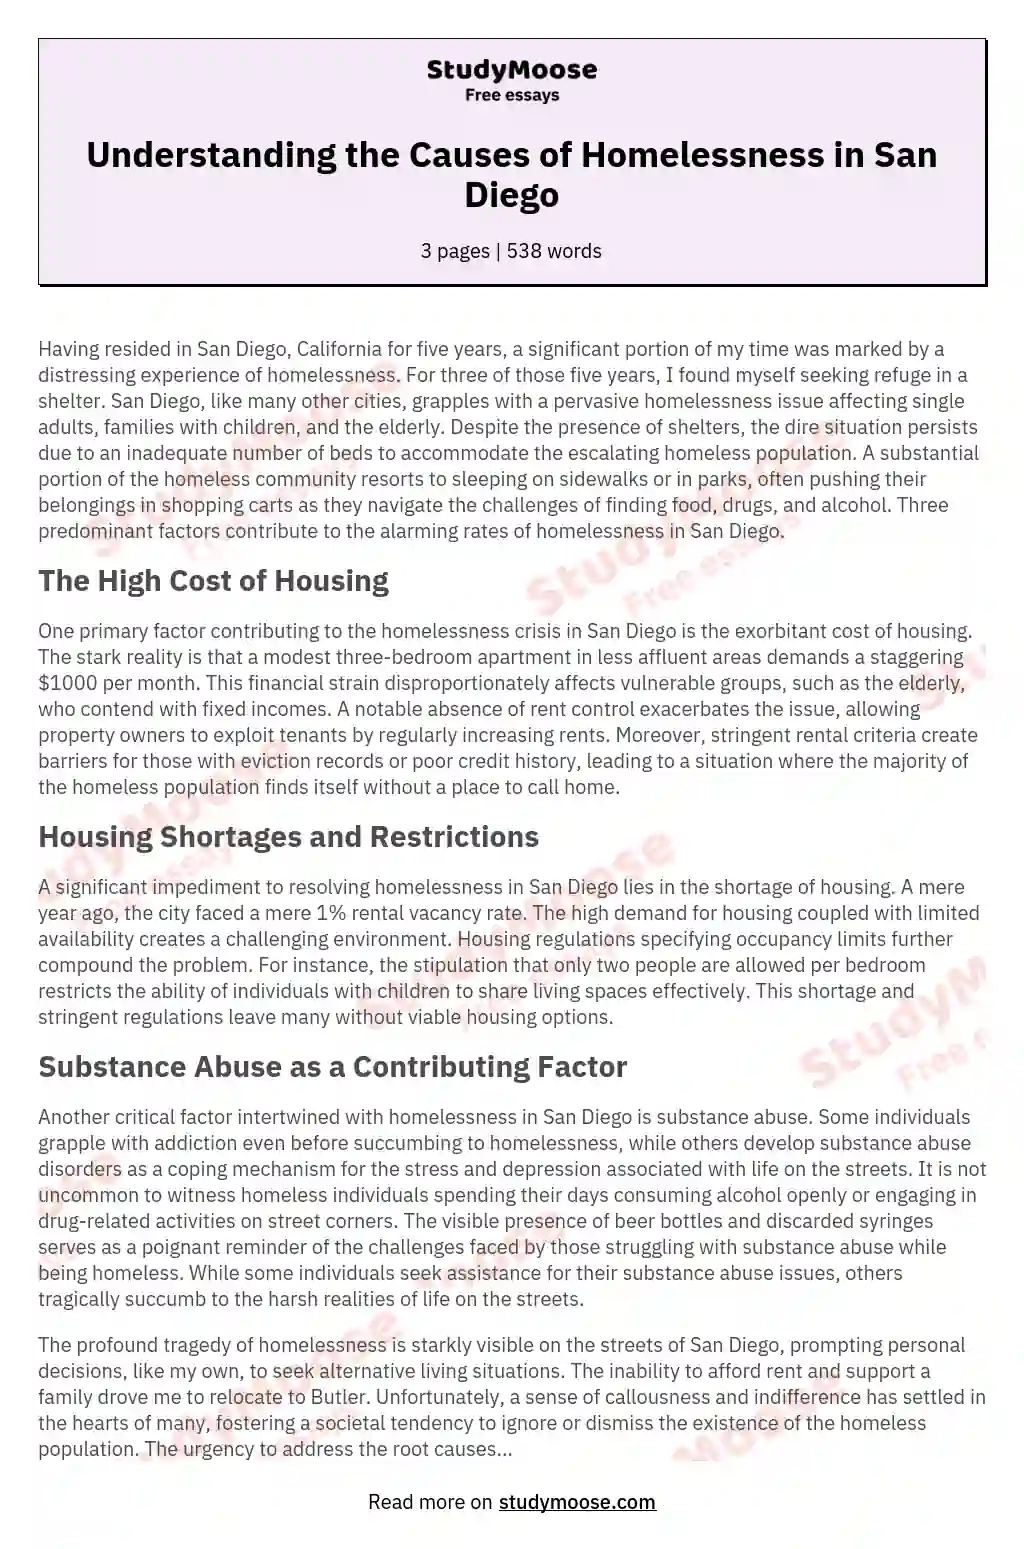 Understanding the Causes of Homelessness in San Diego essay